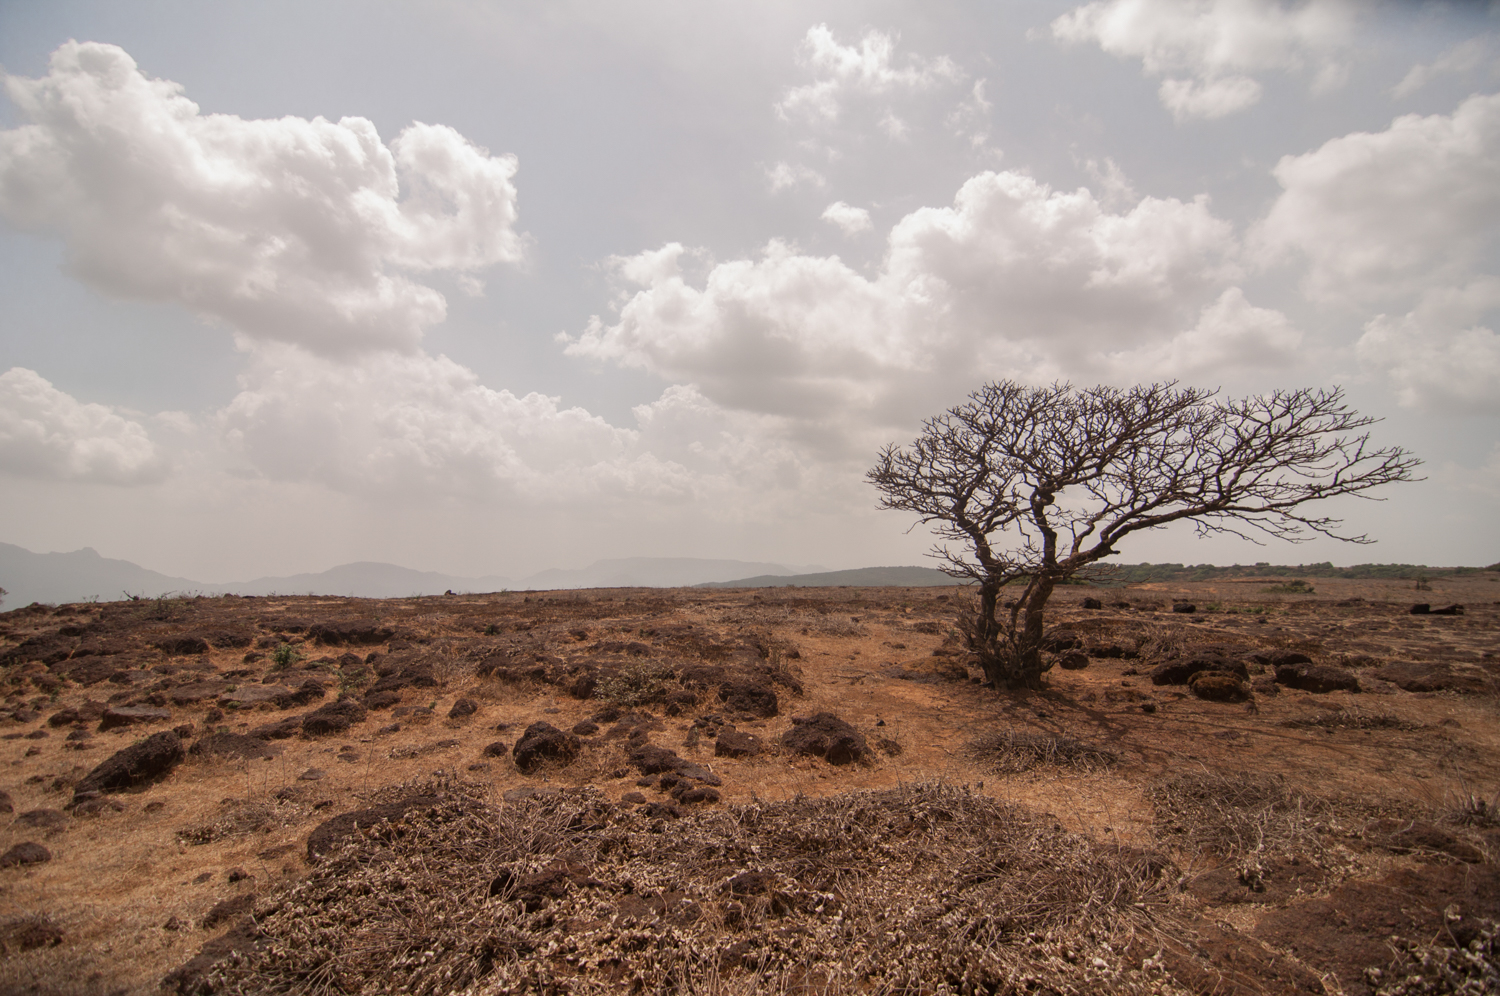  Although rich in geological history, the barren plateau-islands, burnt and desolate in the harsh May sun seem devoid of any signs of wildlife. Could anything survive here? 